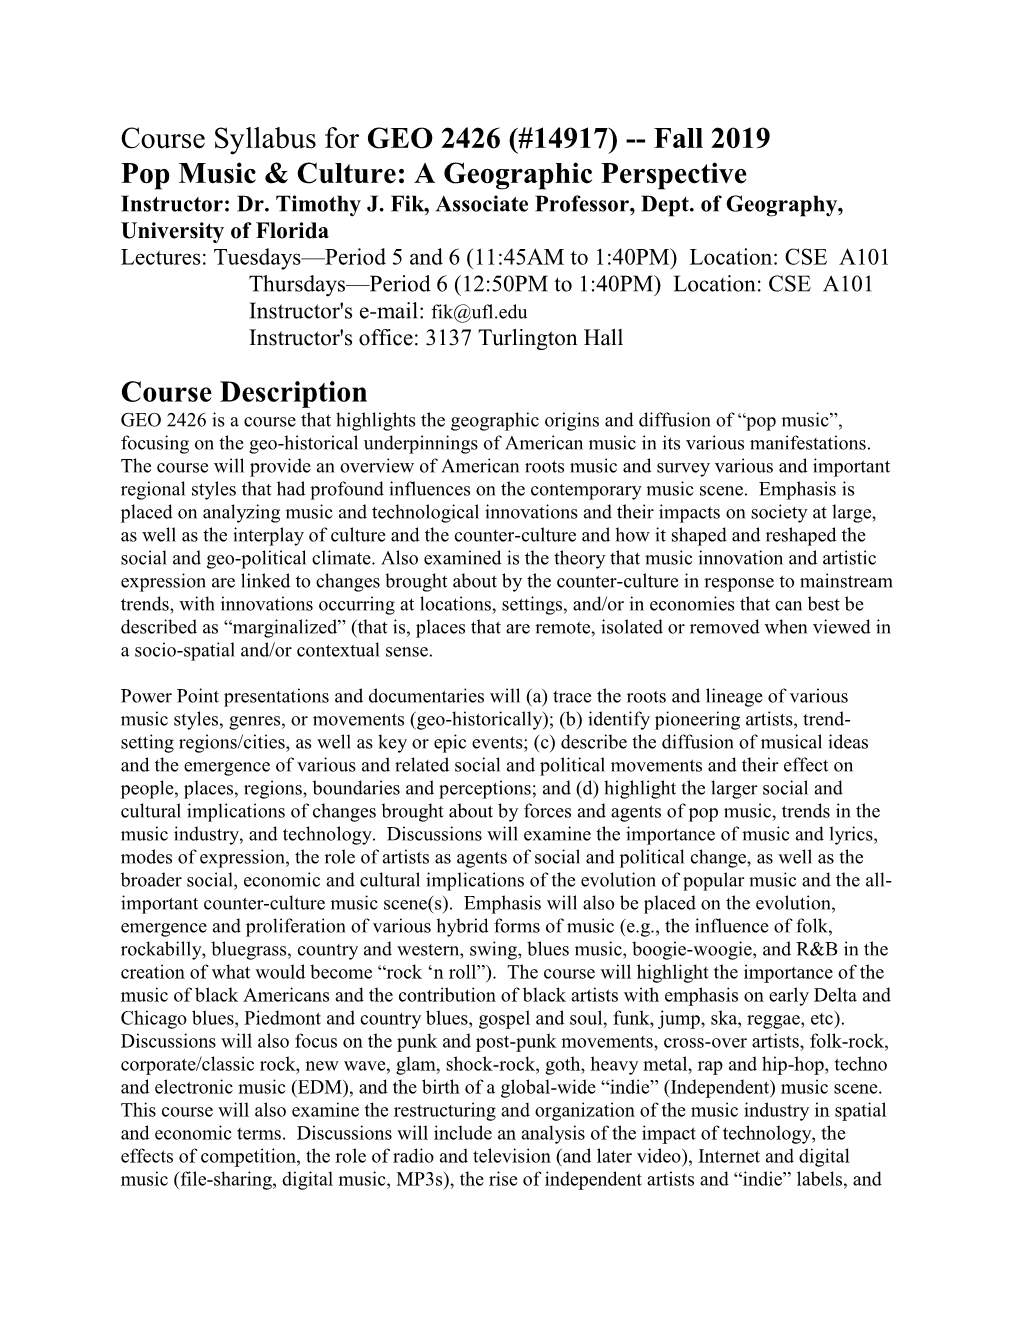 Course Syllabus for GEO 2426 (#14917) -- Fall 2019 Pop Music & Culture: a Geographic Perspective Instructor: Dr